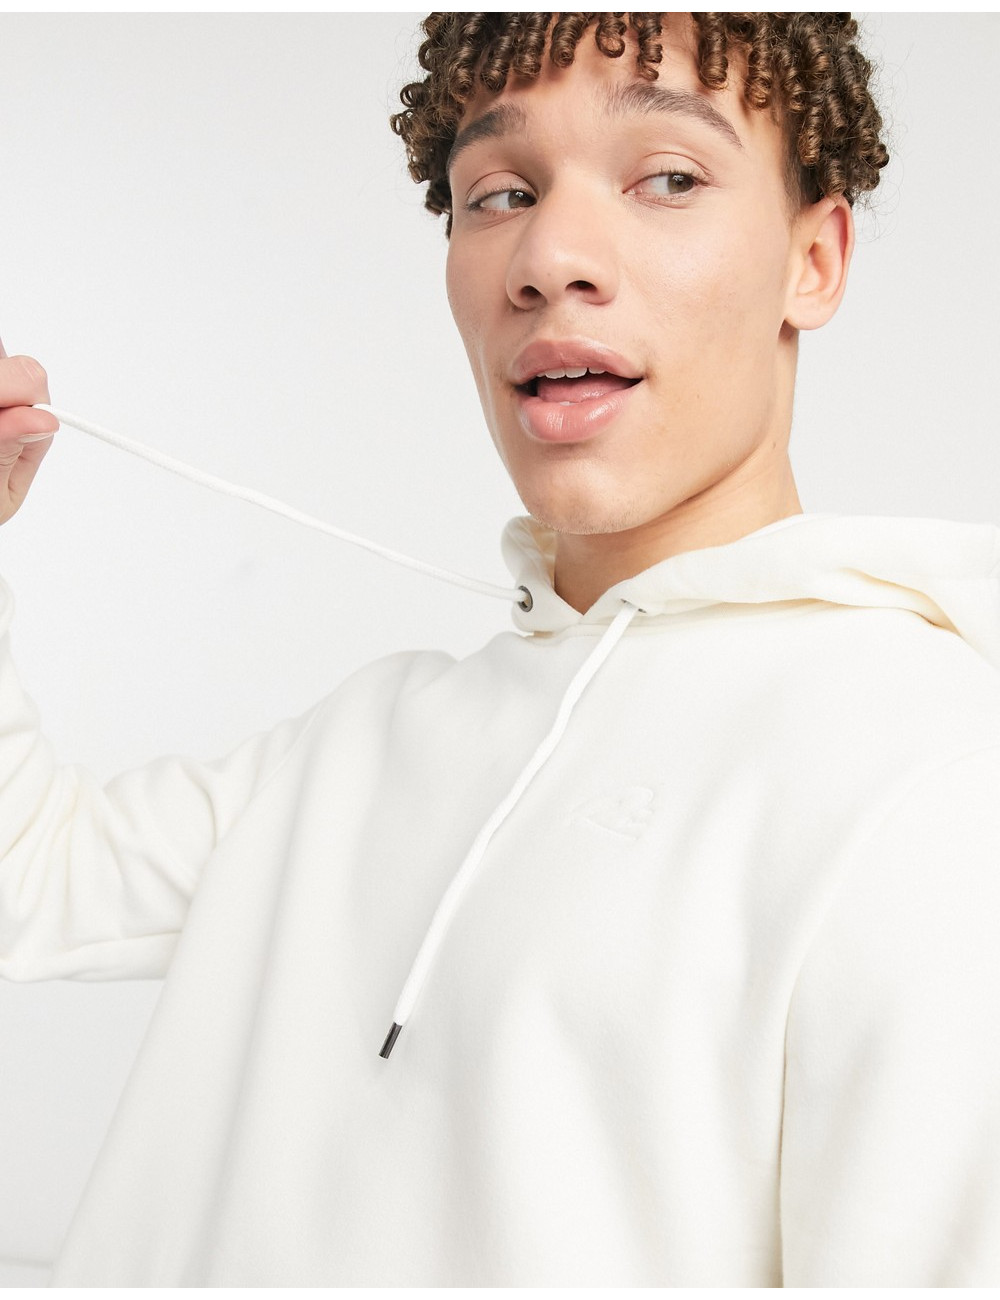 River Island hoodie in white